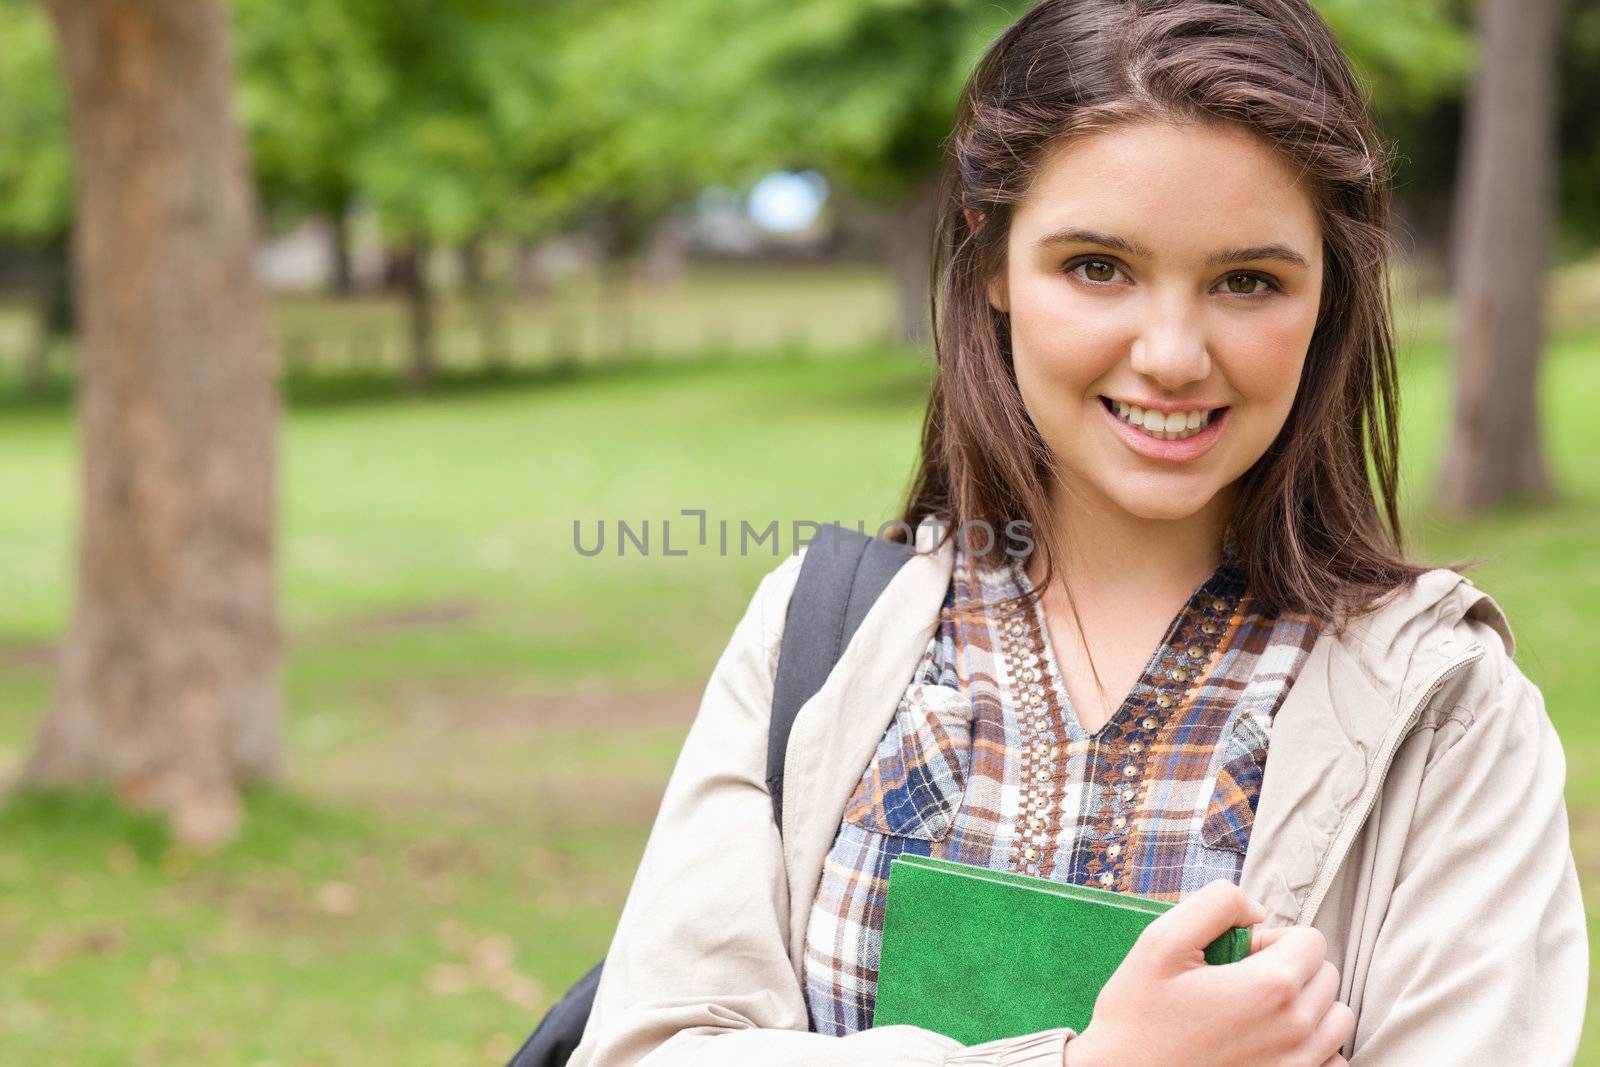 Portrait of a first-year student holding a textbook while posing in a park